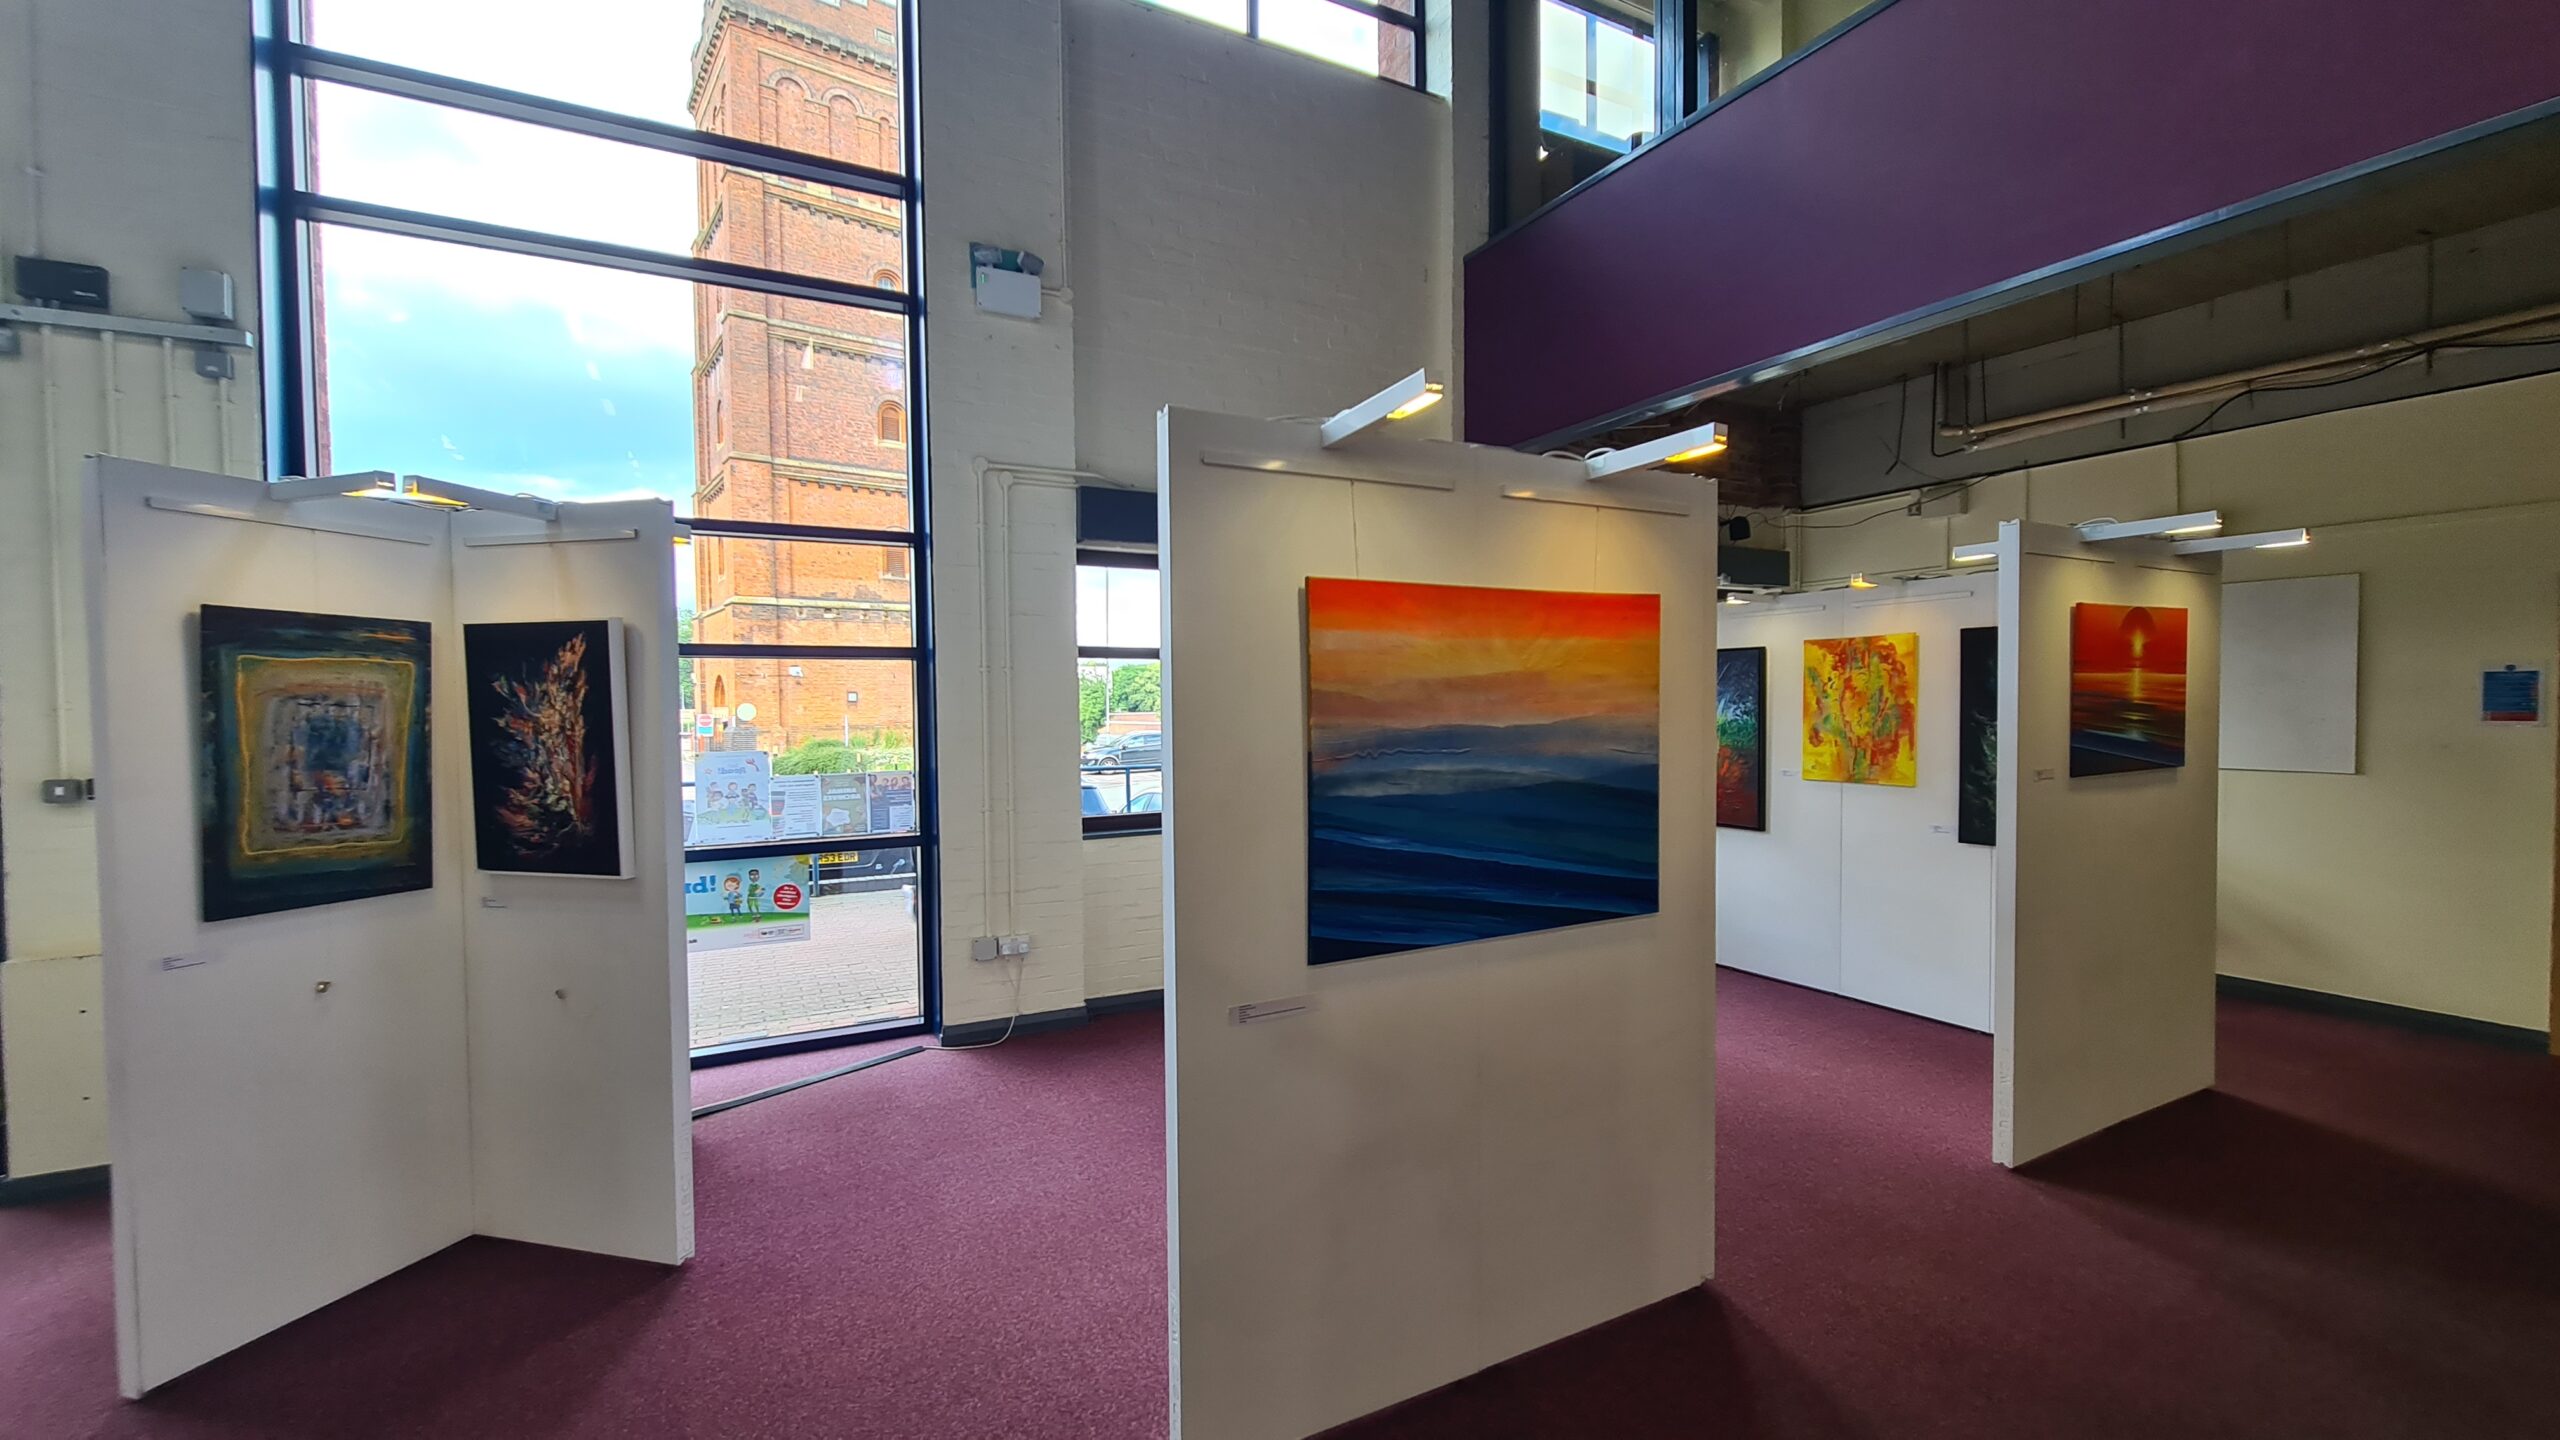  ”Connection” ART EXHIBITION in Burton Library from July 25th until August 6th.